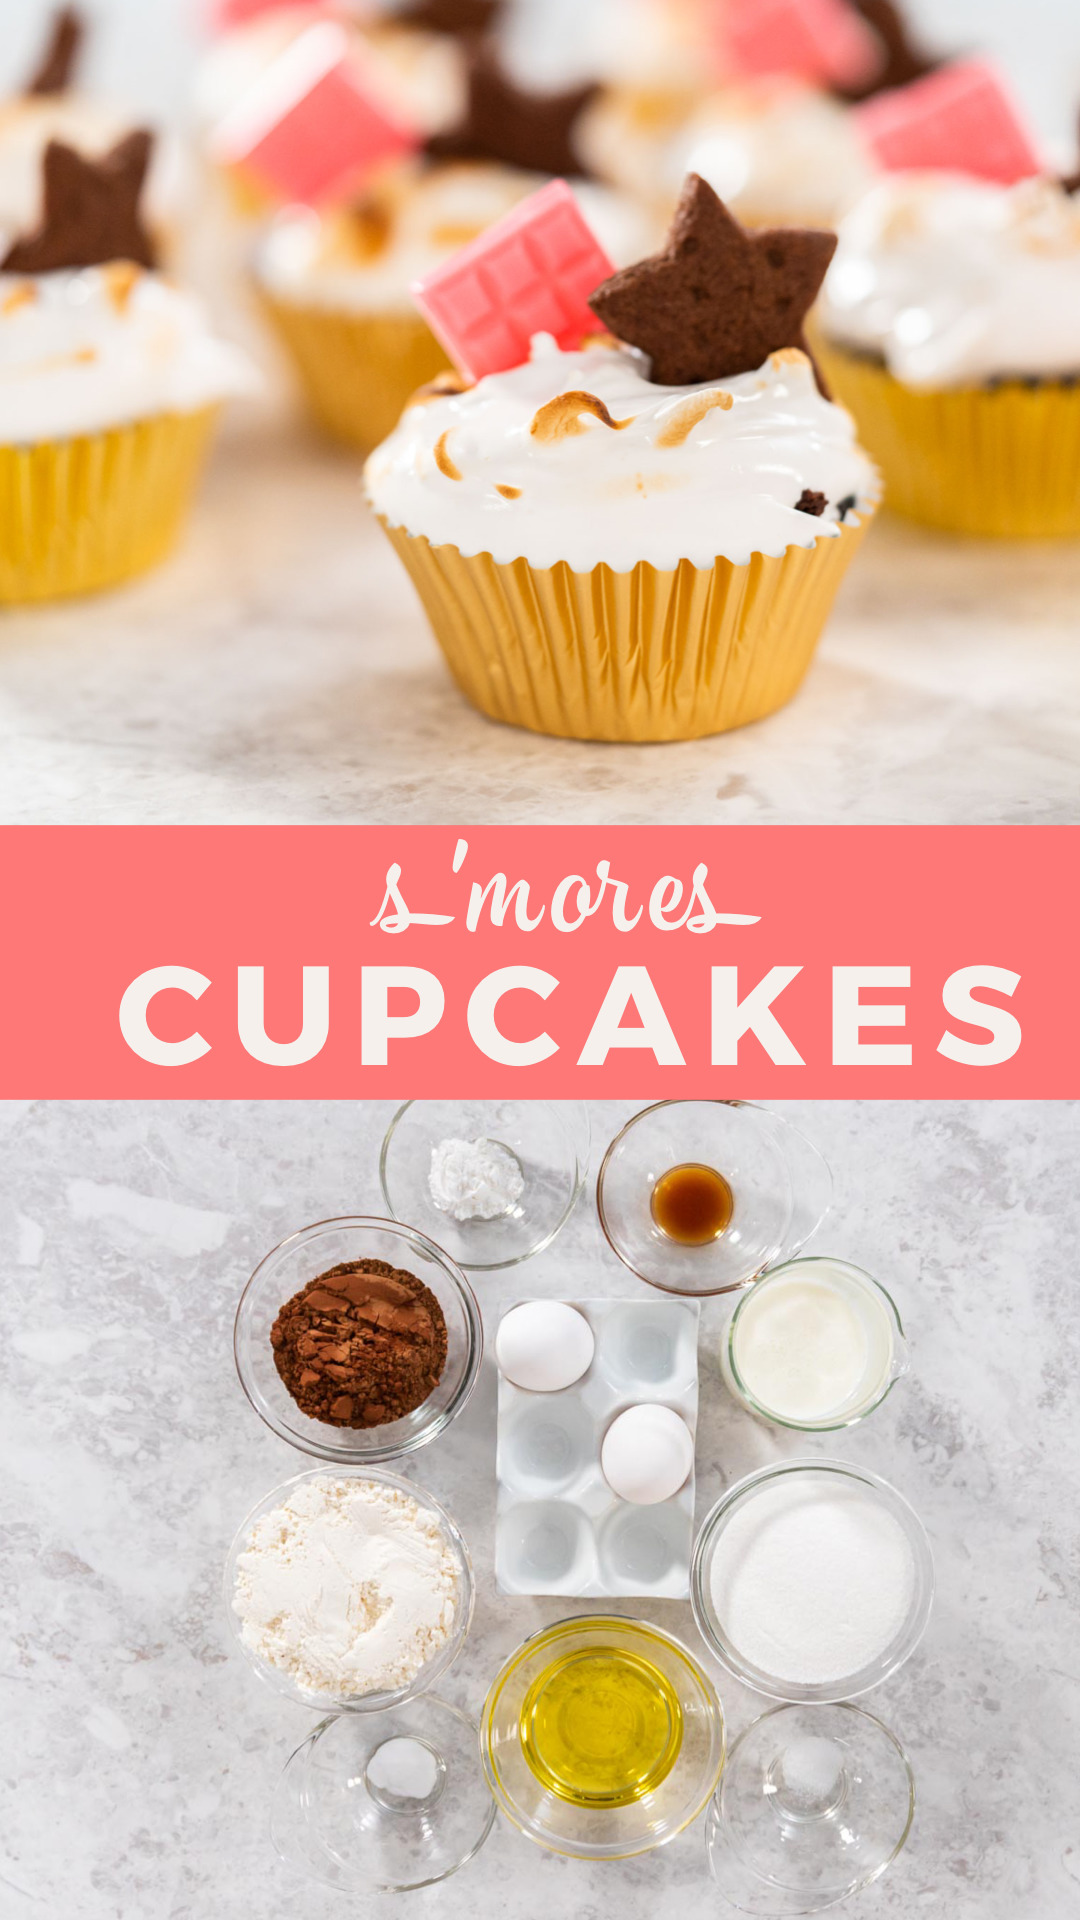 S\'mores cupcakes